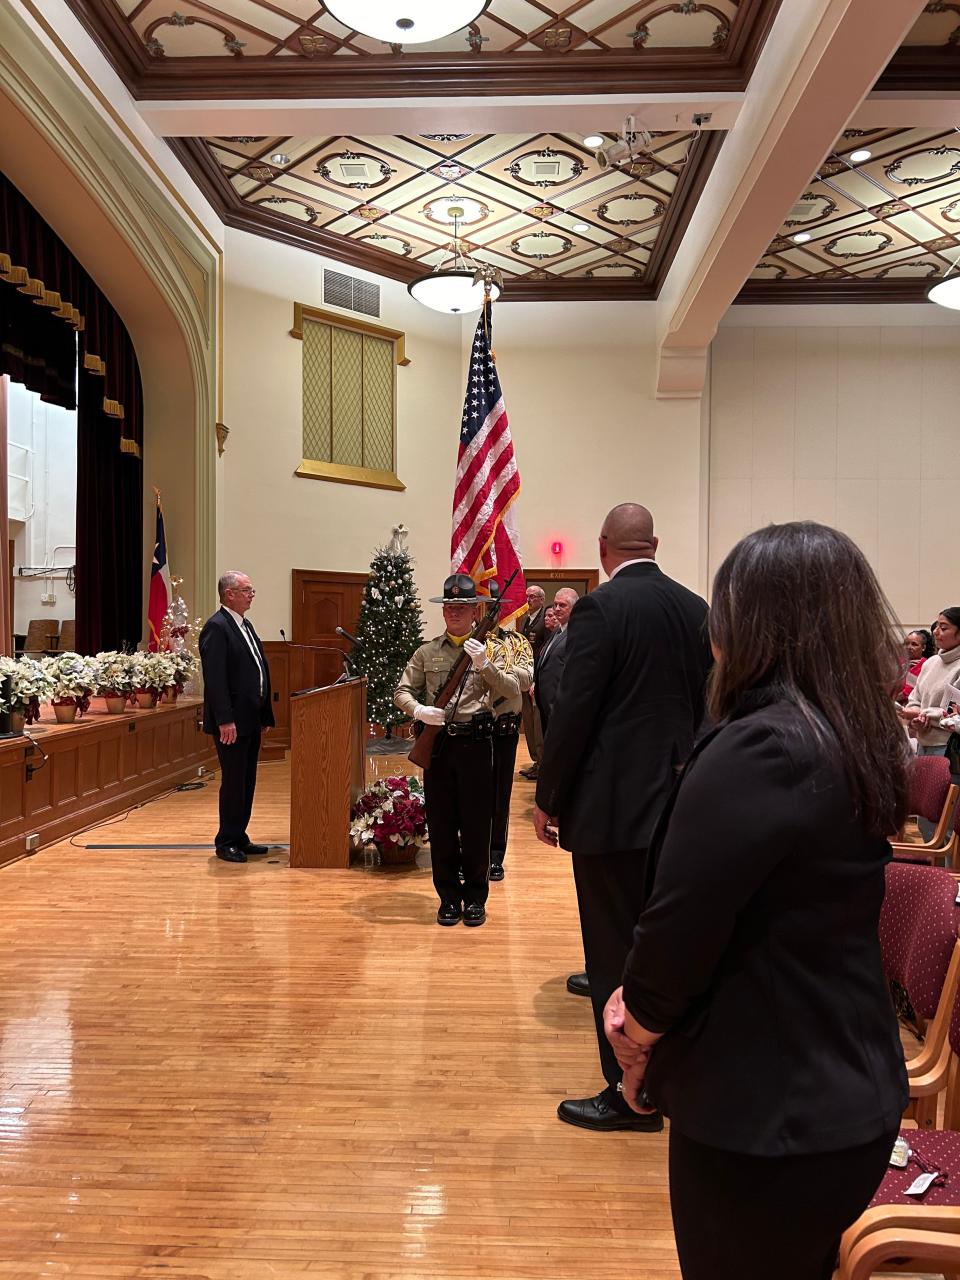 The Potter County Sheriff's Office Color Guard takes part in the 21st annual Tree of Angels Ceremony, held Friday evening at the Santa Fe Building Auditorium.